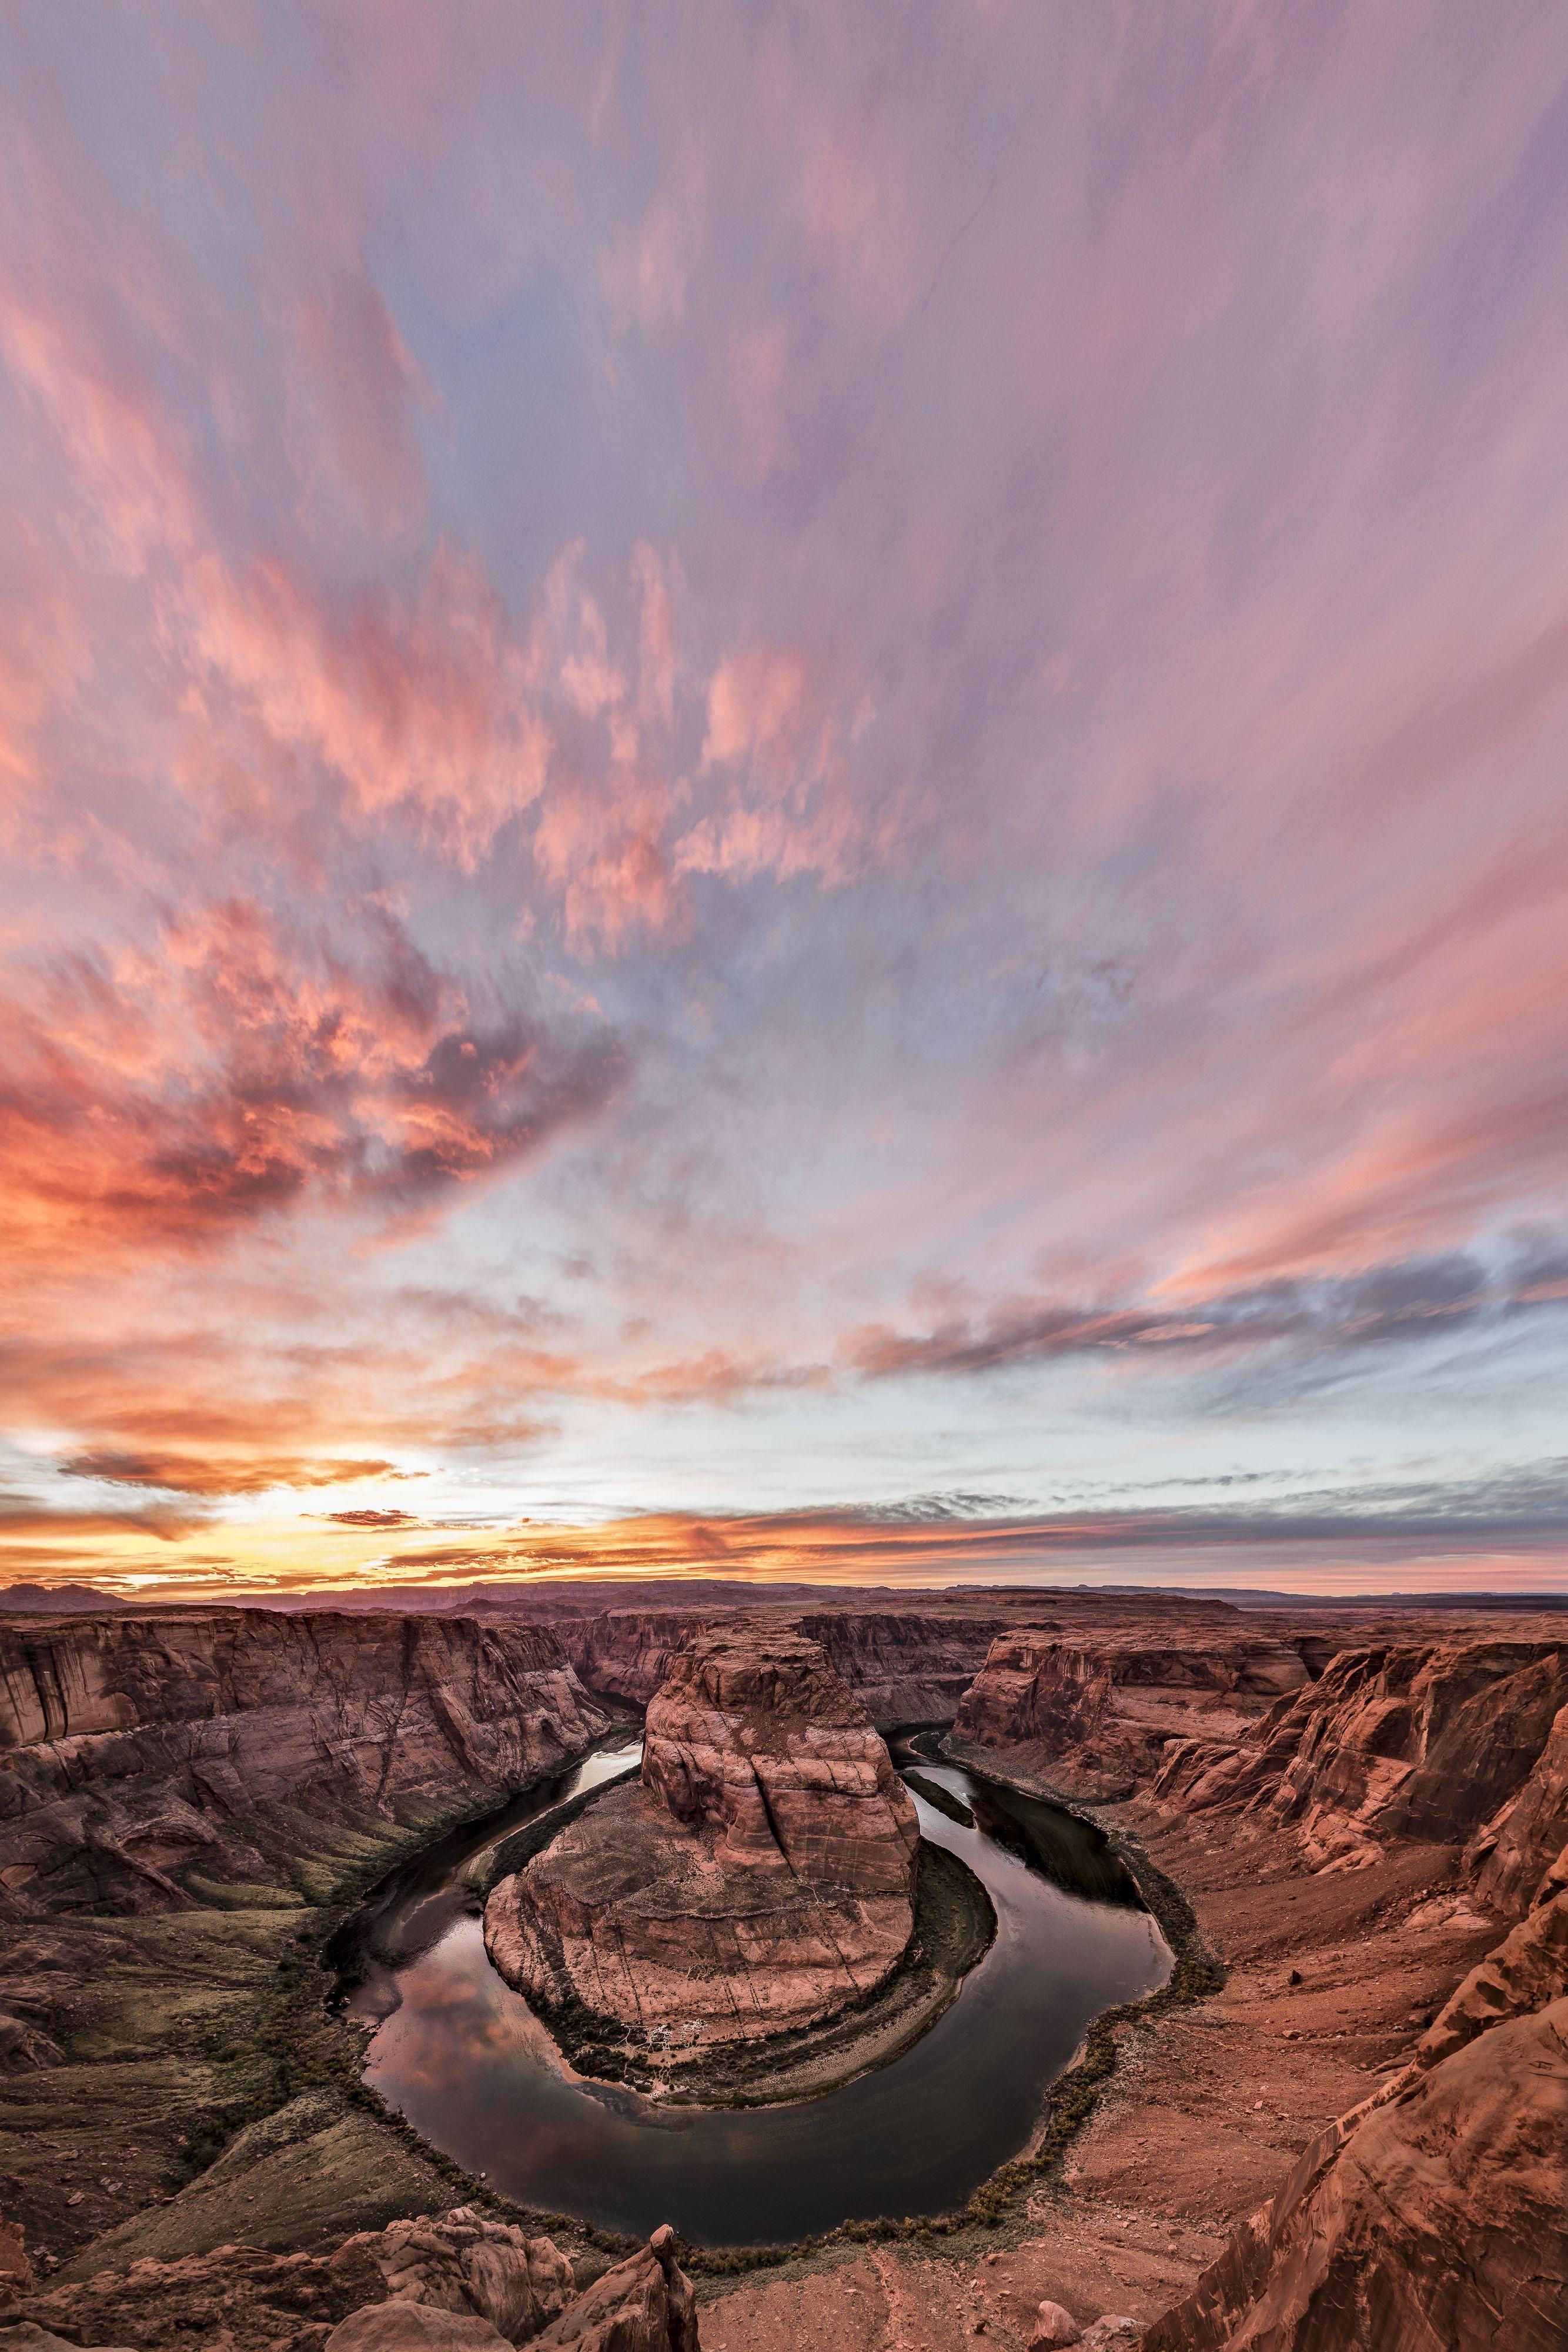 Jon Glaser Color Photograph - 180 Degrees of Sunset, Photograph, Archival Ink Jet